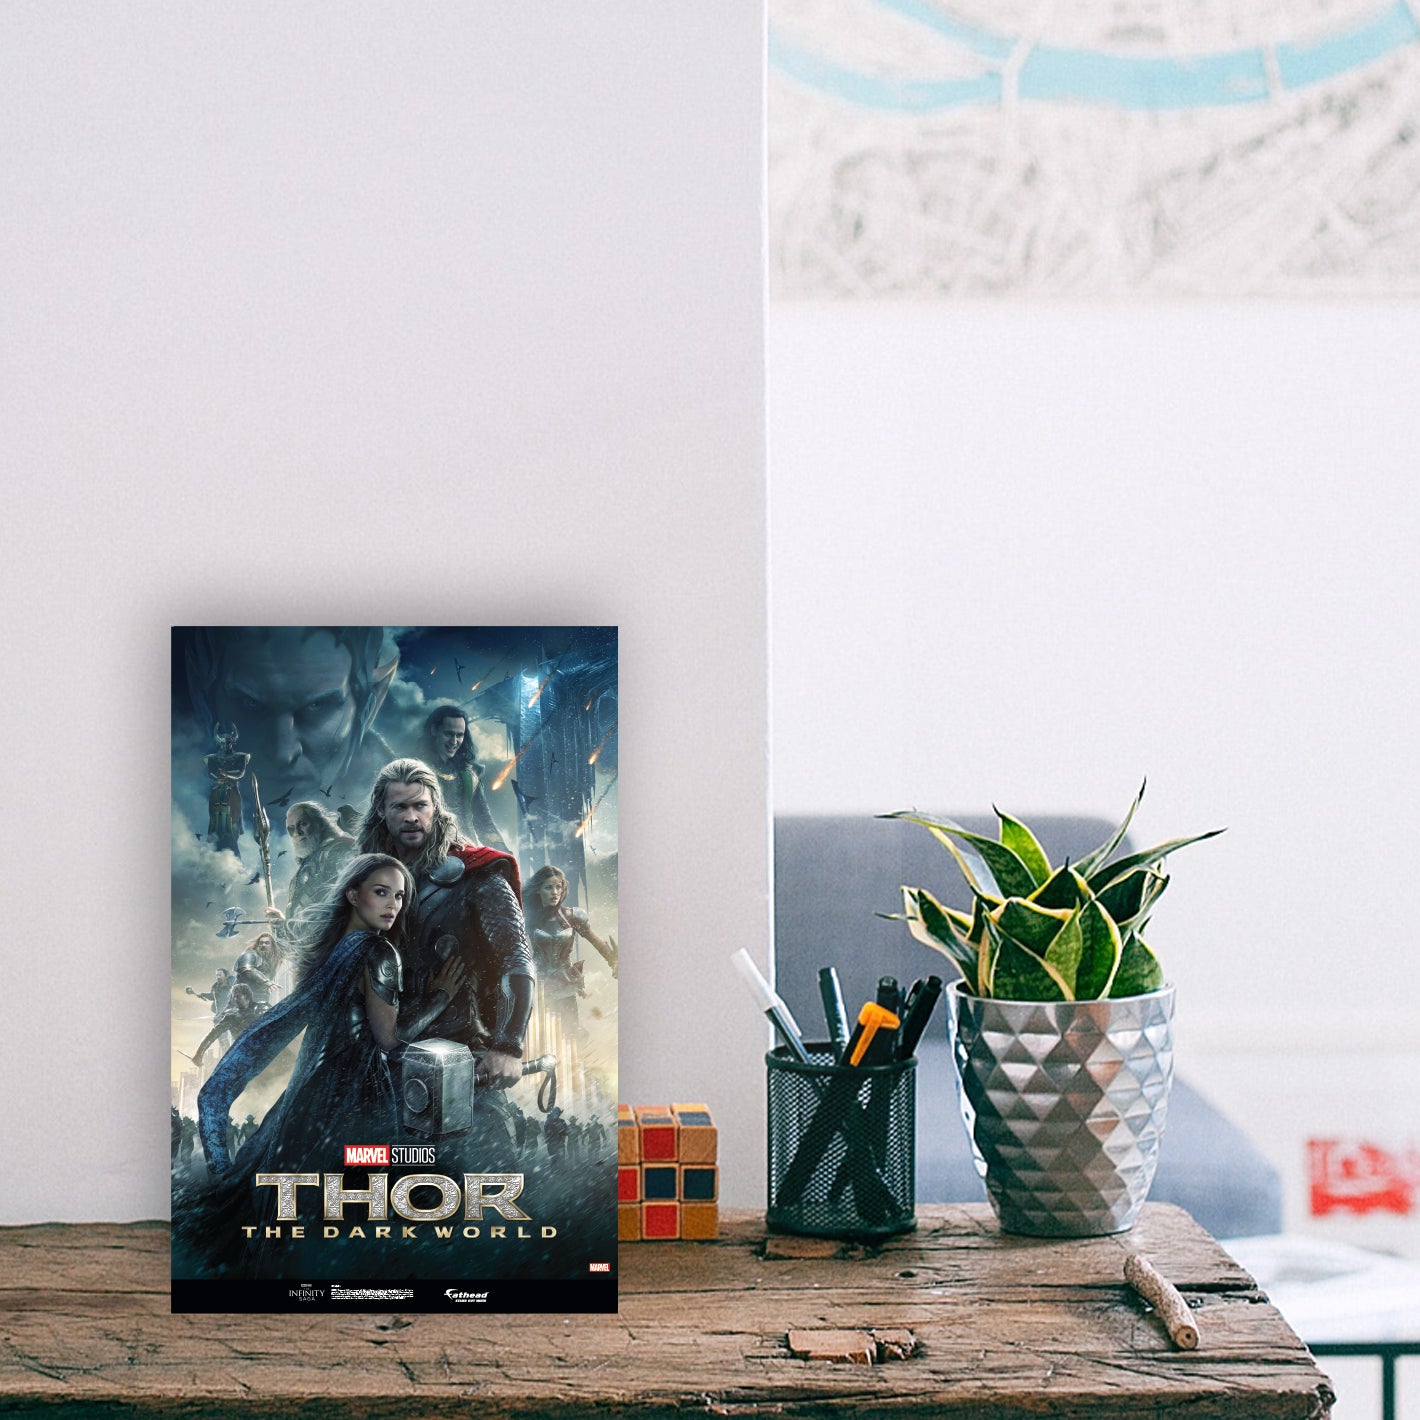 Thor: Thor Dark World Poster  Mini   Cardstock Cutout  - Officially Licensed Marvel    Stand Out